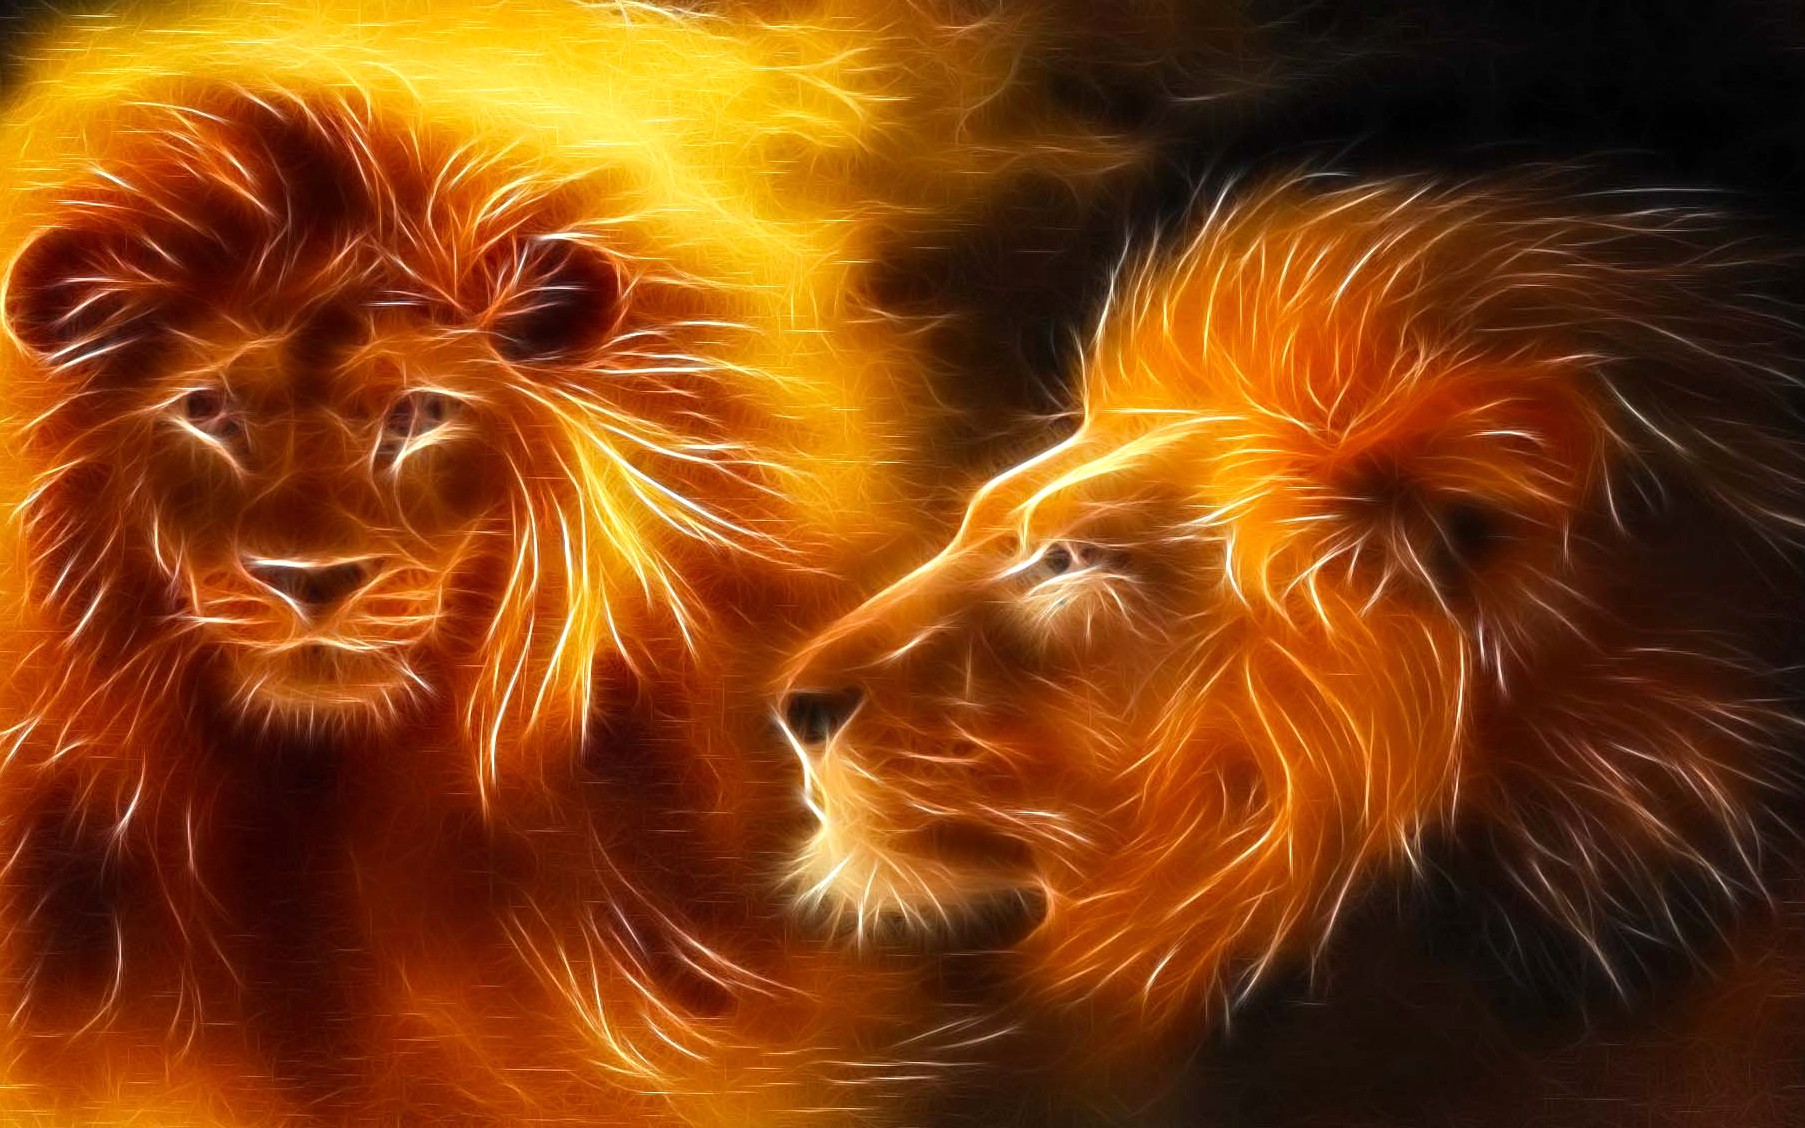 Lion, Abstract, Art, Desktop Images, Android Wallpapers, - Masai Lion - HD Wallpaper 